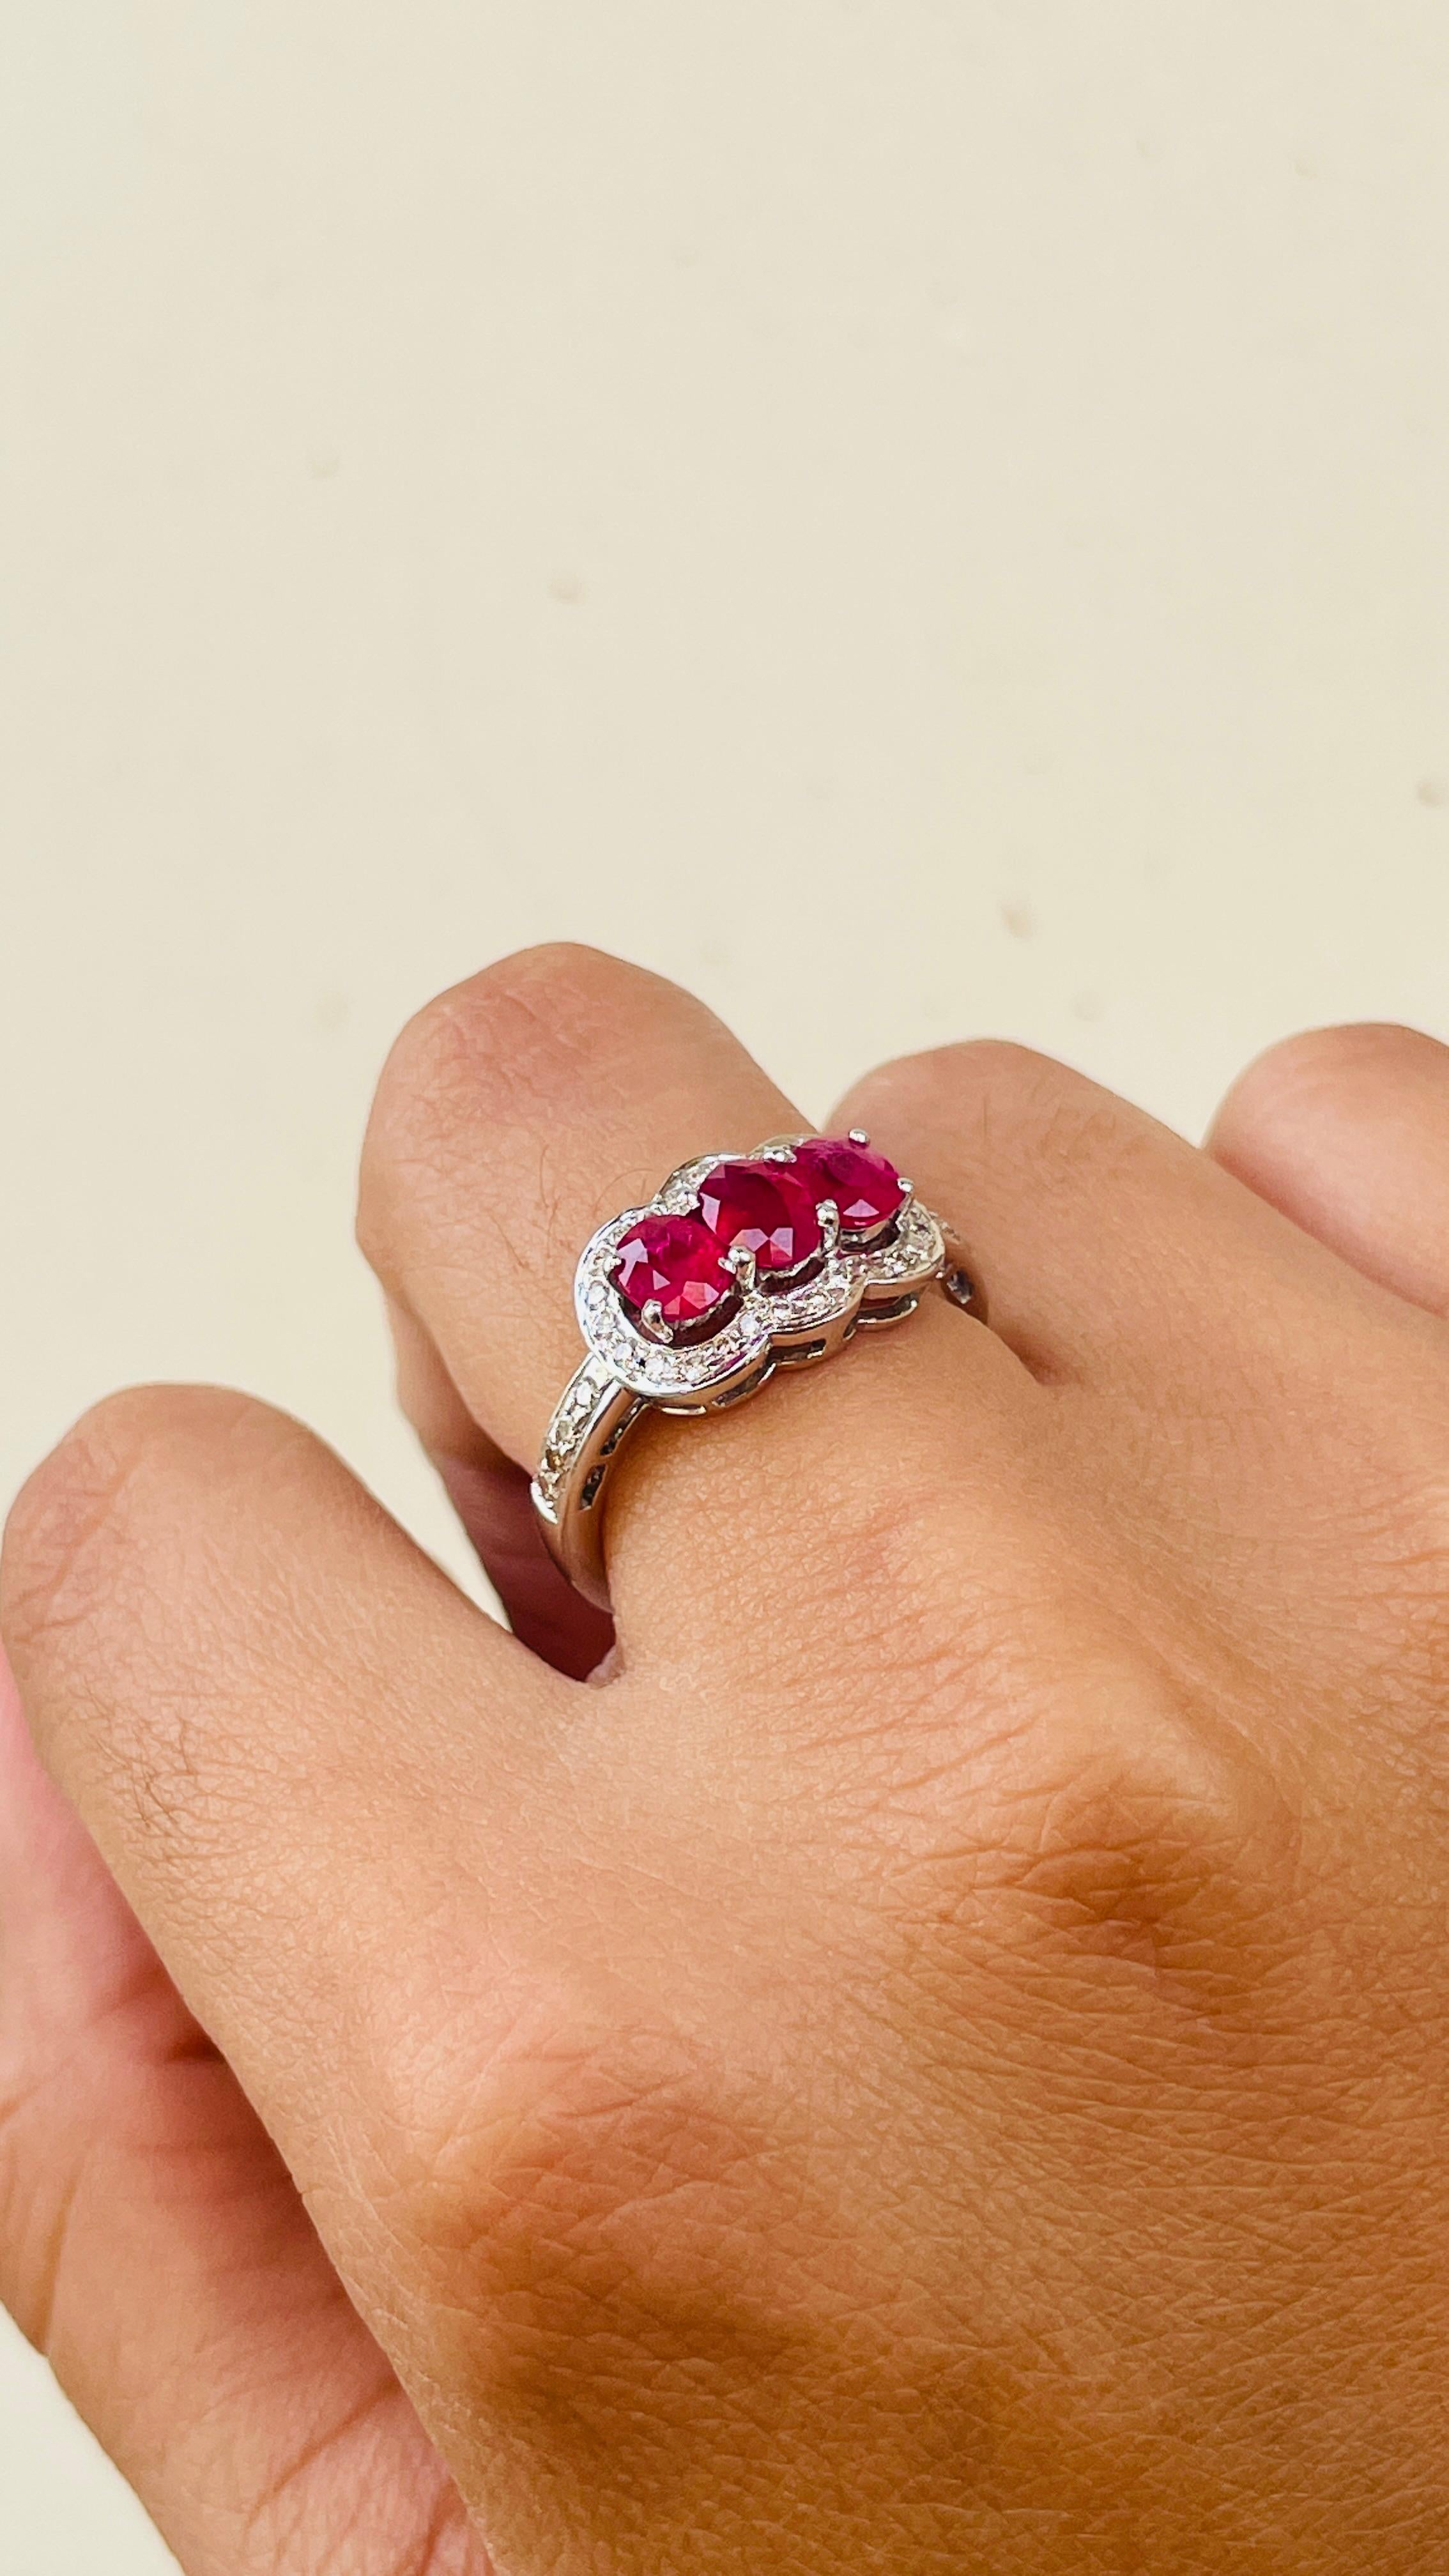 For Sale:  Oval Cut Three Stone Ruby Engagement Ring in 18K White Gold with Diamonds 2